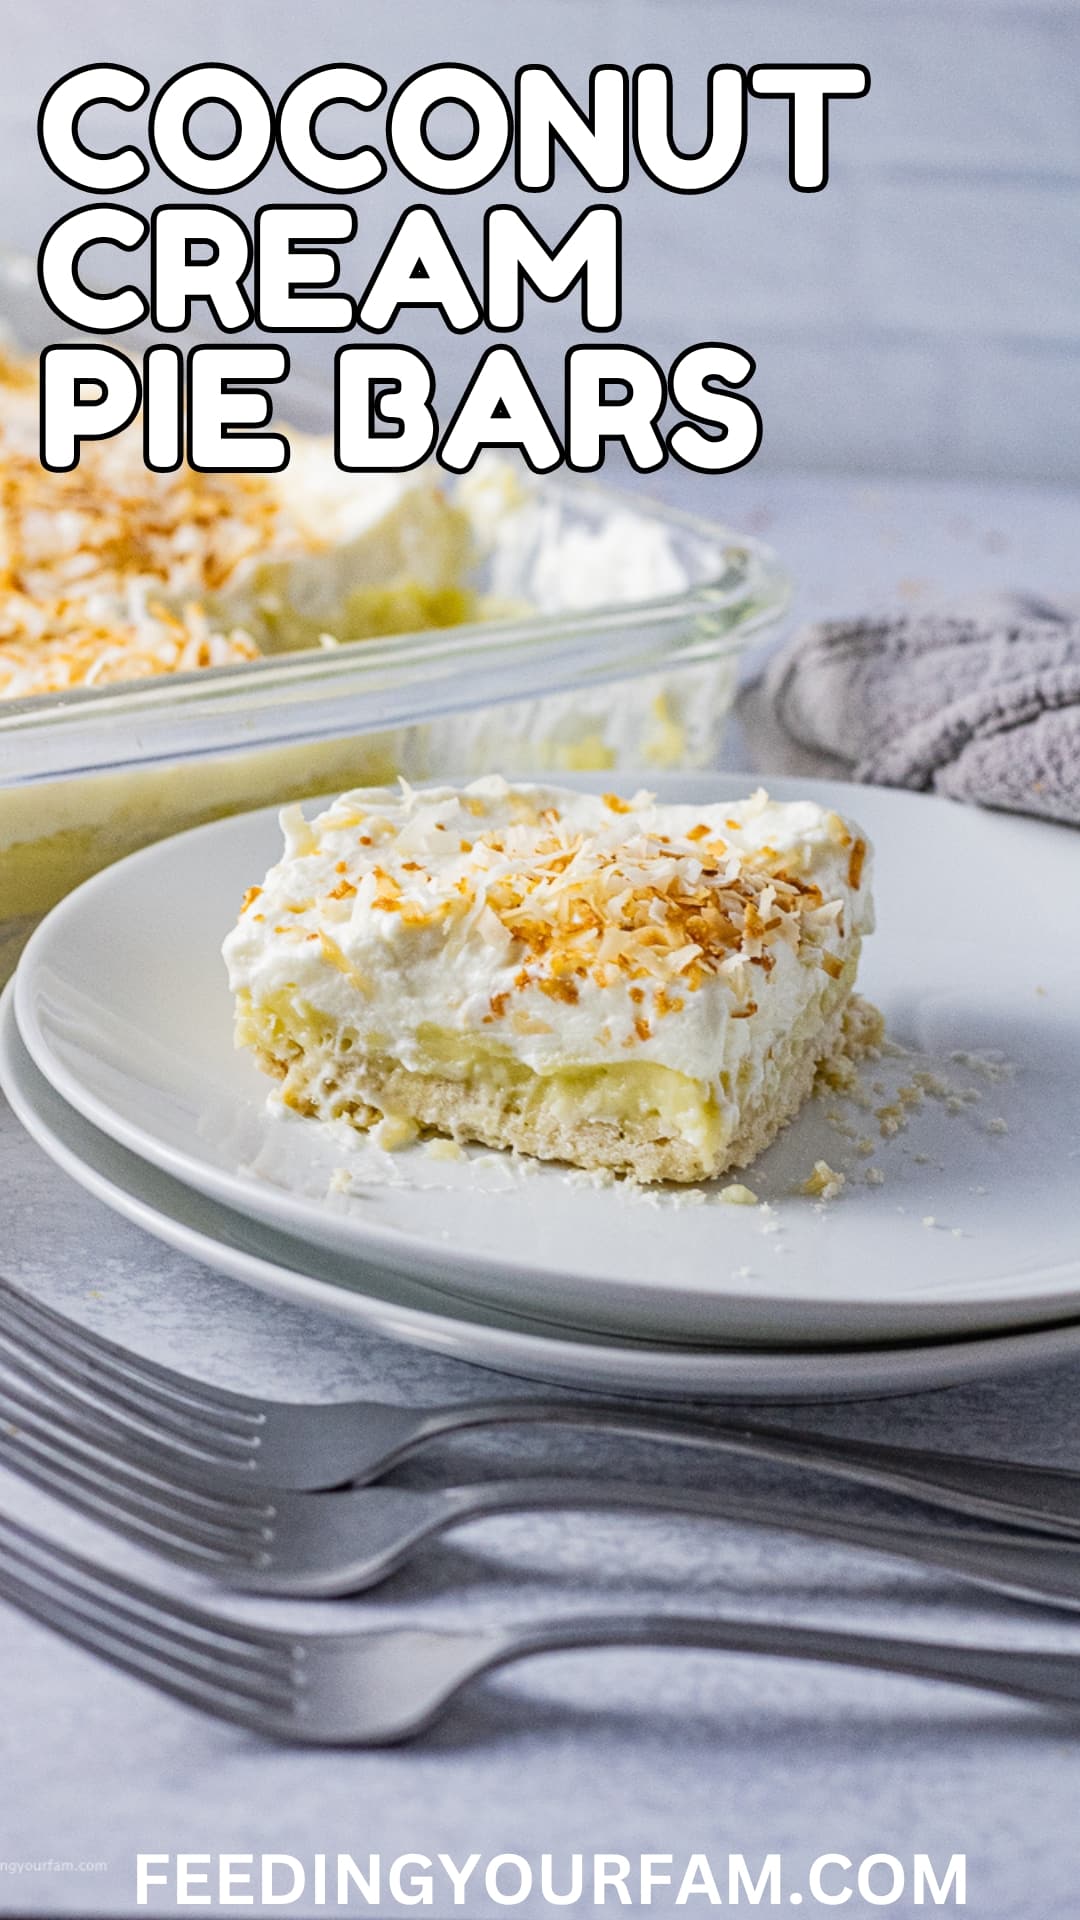 These Coconut Cream Pie Bars have a buttery, shortbread crust with a layer of coconut custard and whipped cream. These are always so fun to share.